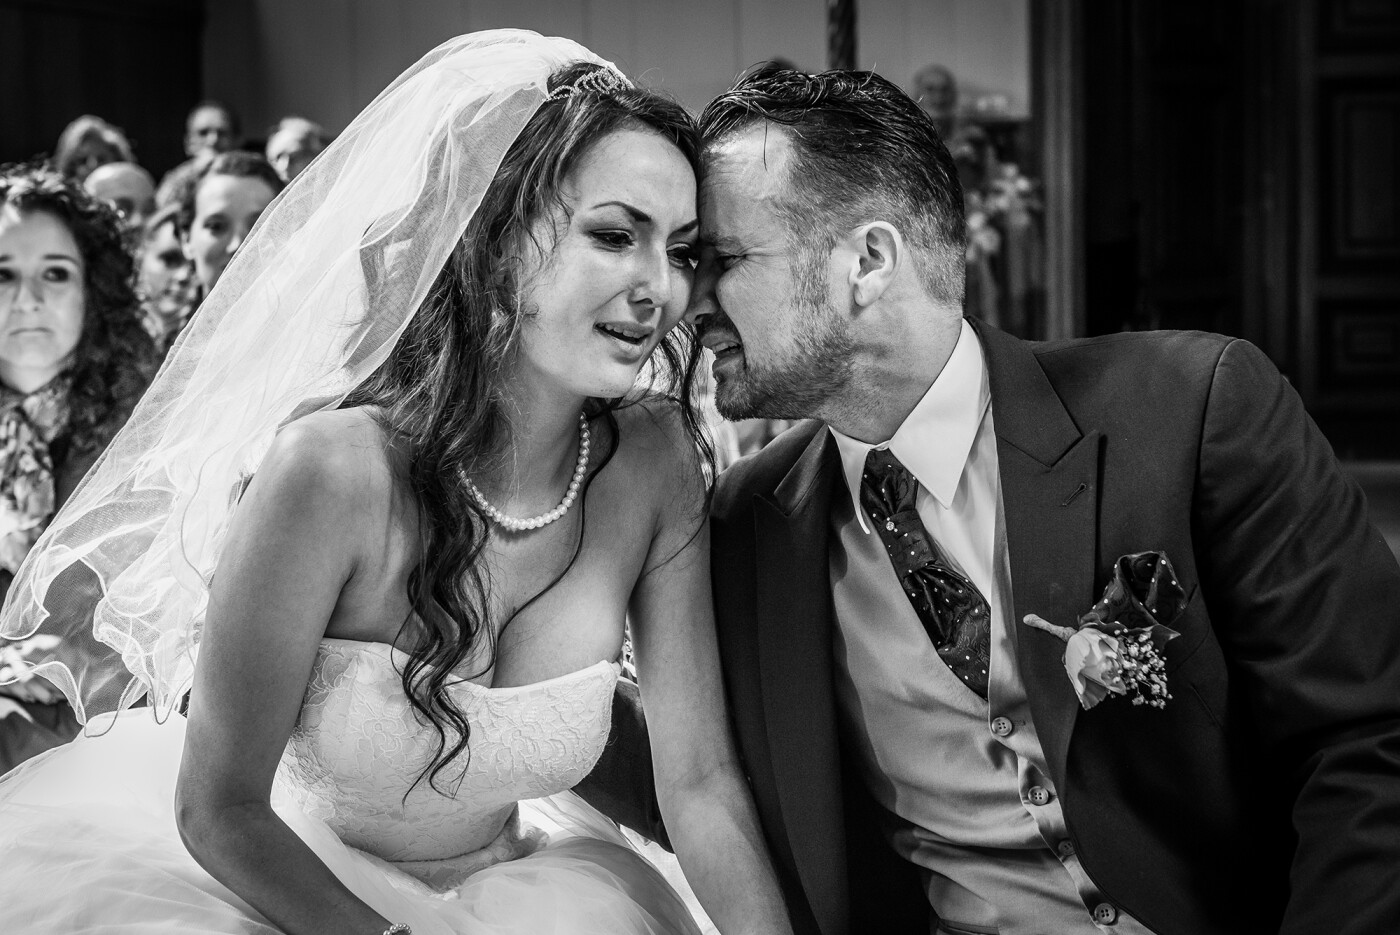 Tears of happiness! <br />
<br />
During the church ceremony the Bride and Groom sharded their deepest emotions with all guests. There was so much love between the both of them, it made the eyes of us photopgraphers moisty too. The picture was taken in Hoorn, the Netherlands.